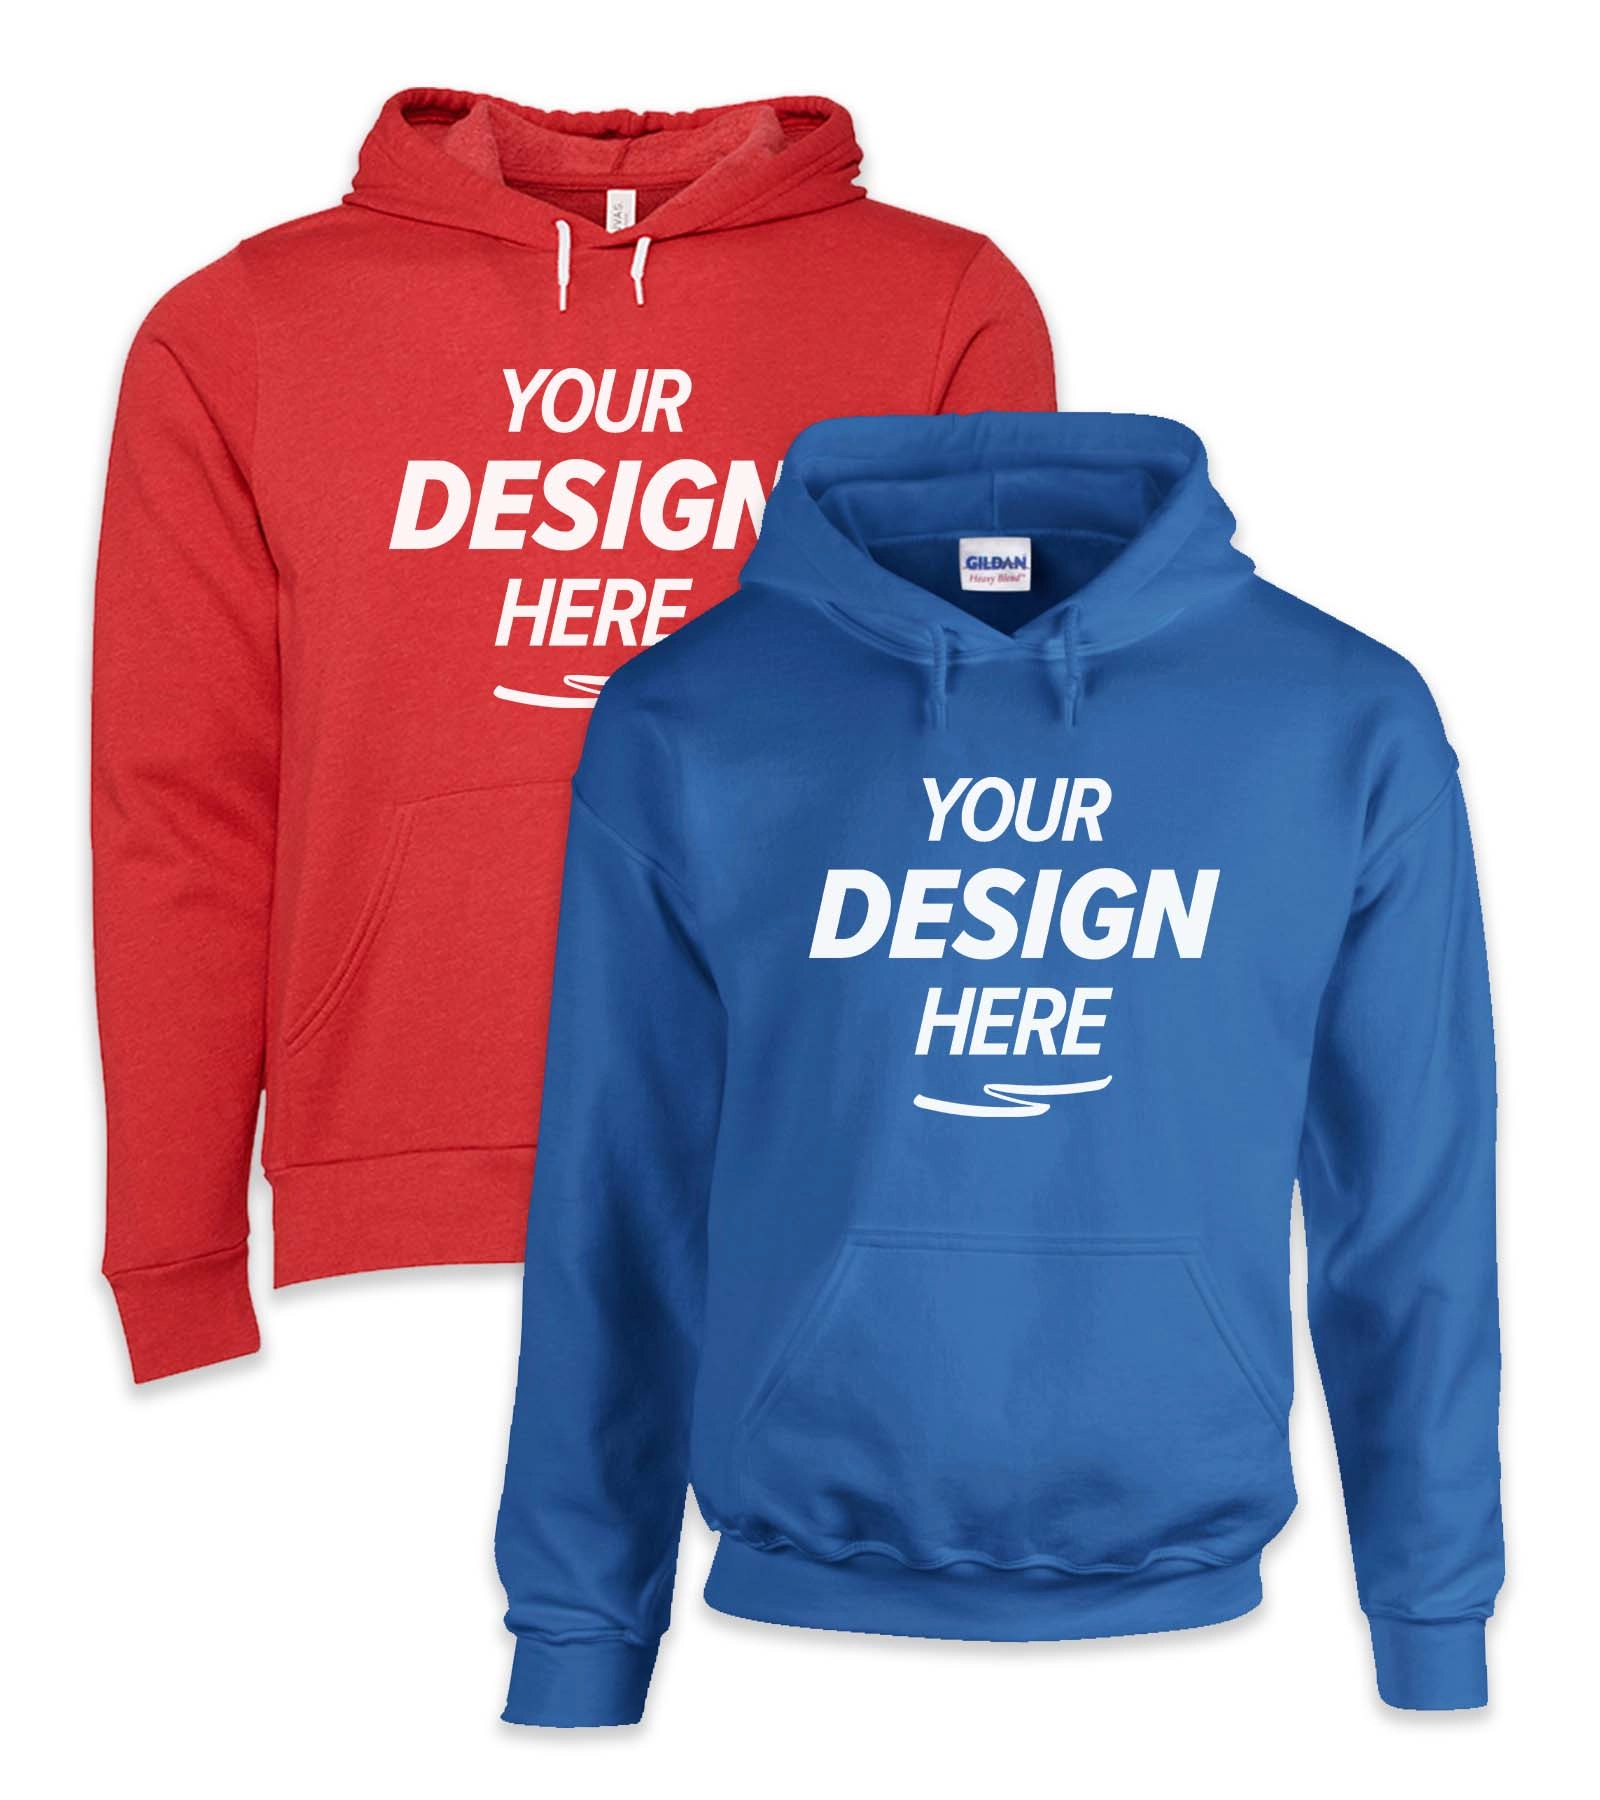 Custom Sweat Shirts Supplier And Manufacturer From Bangladesh